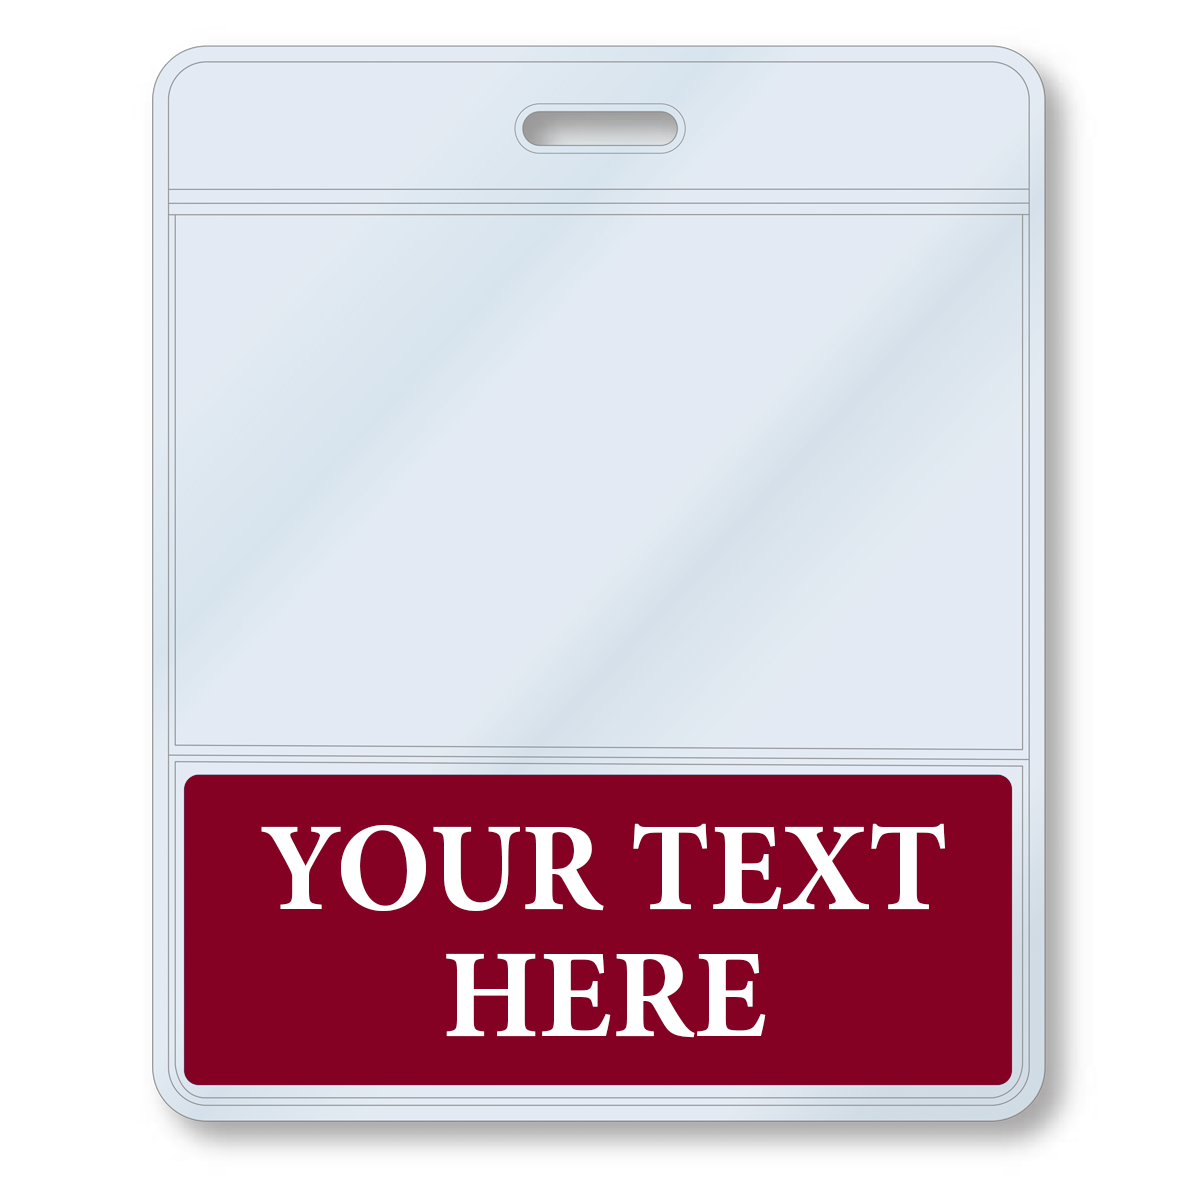 A Custom Printed BadgeBottoms® Horizontal (Badge Holder & Badge Buddy IN ONE) with a clear top section and a customizable title area at the bottom, reading "YOUR TEXT HERE" in white text on a maroon background.